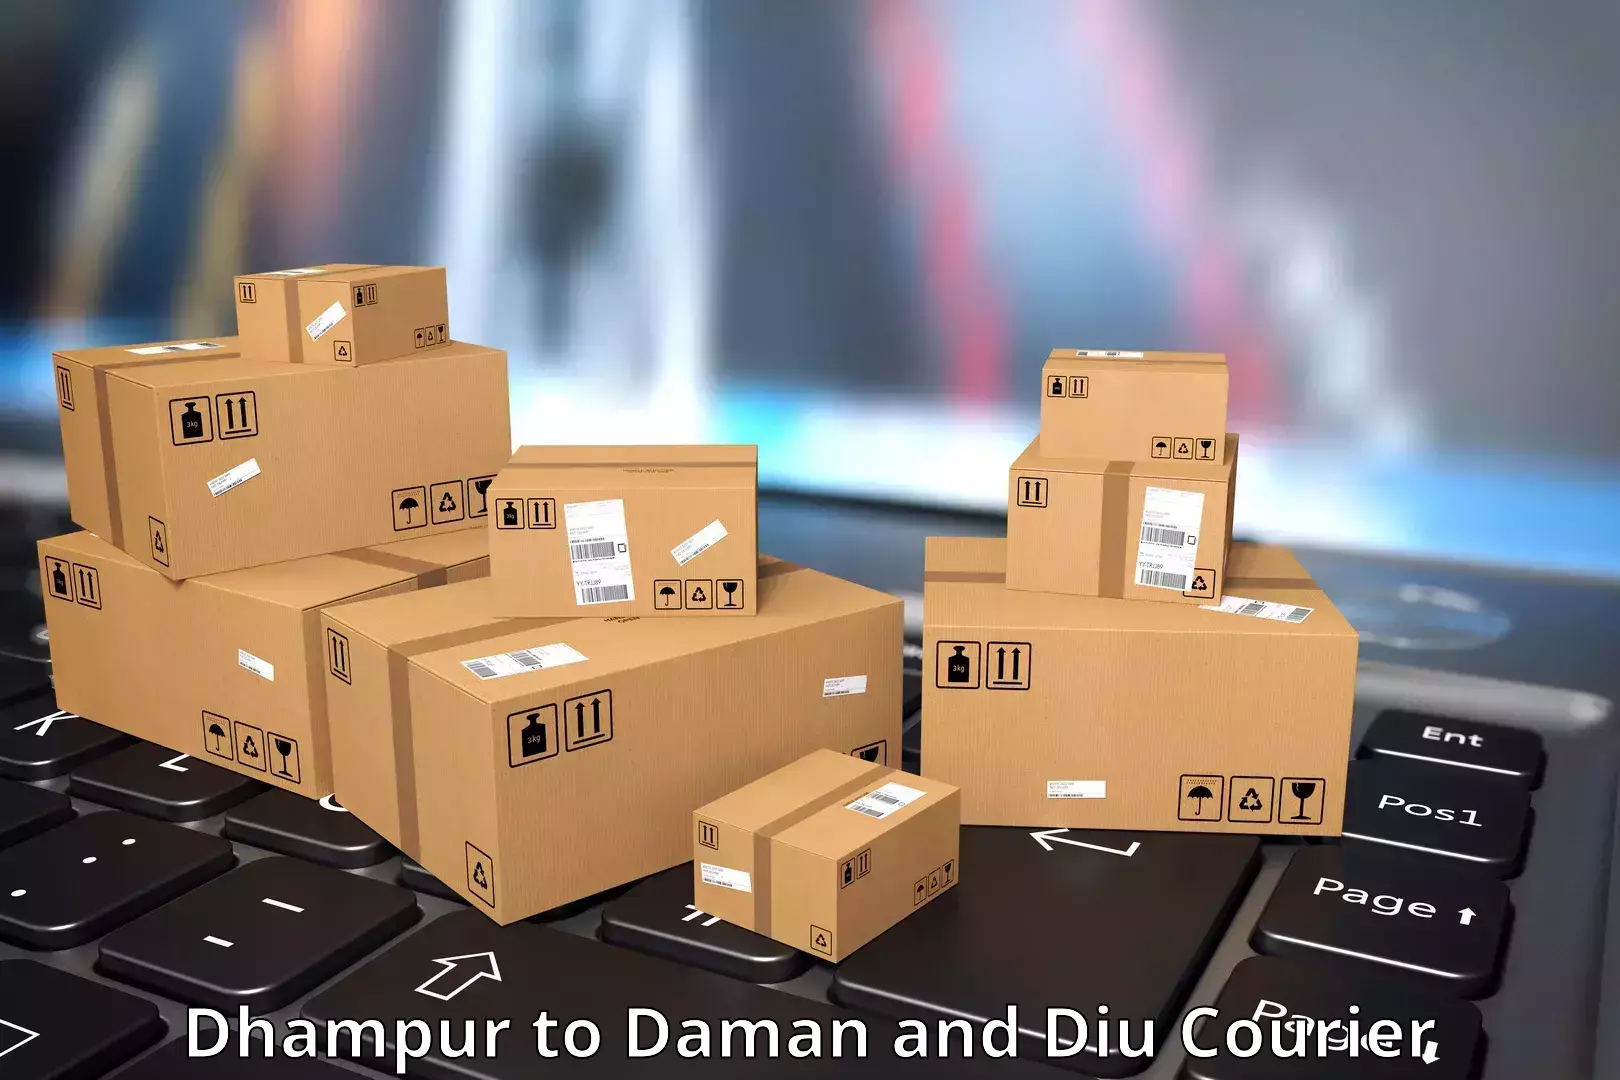 Ground shipping Dhampur to Diu